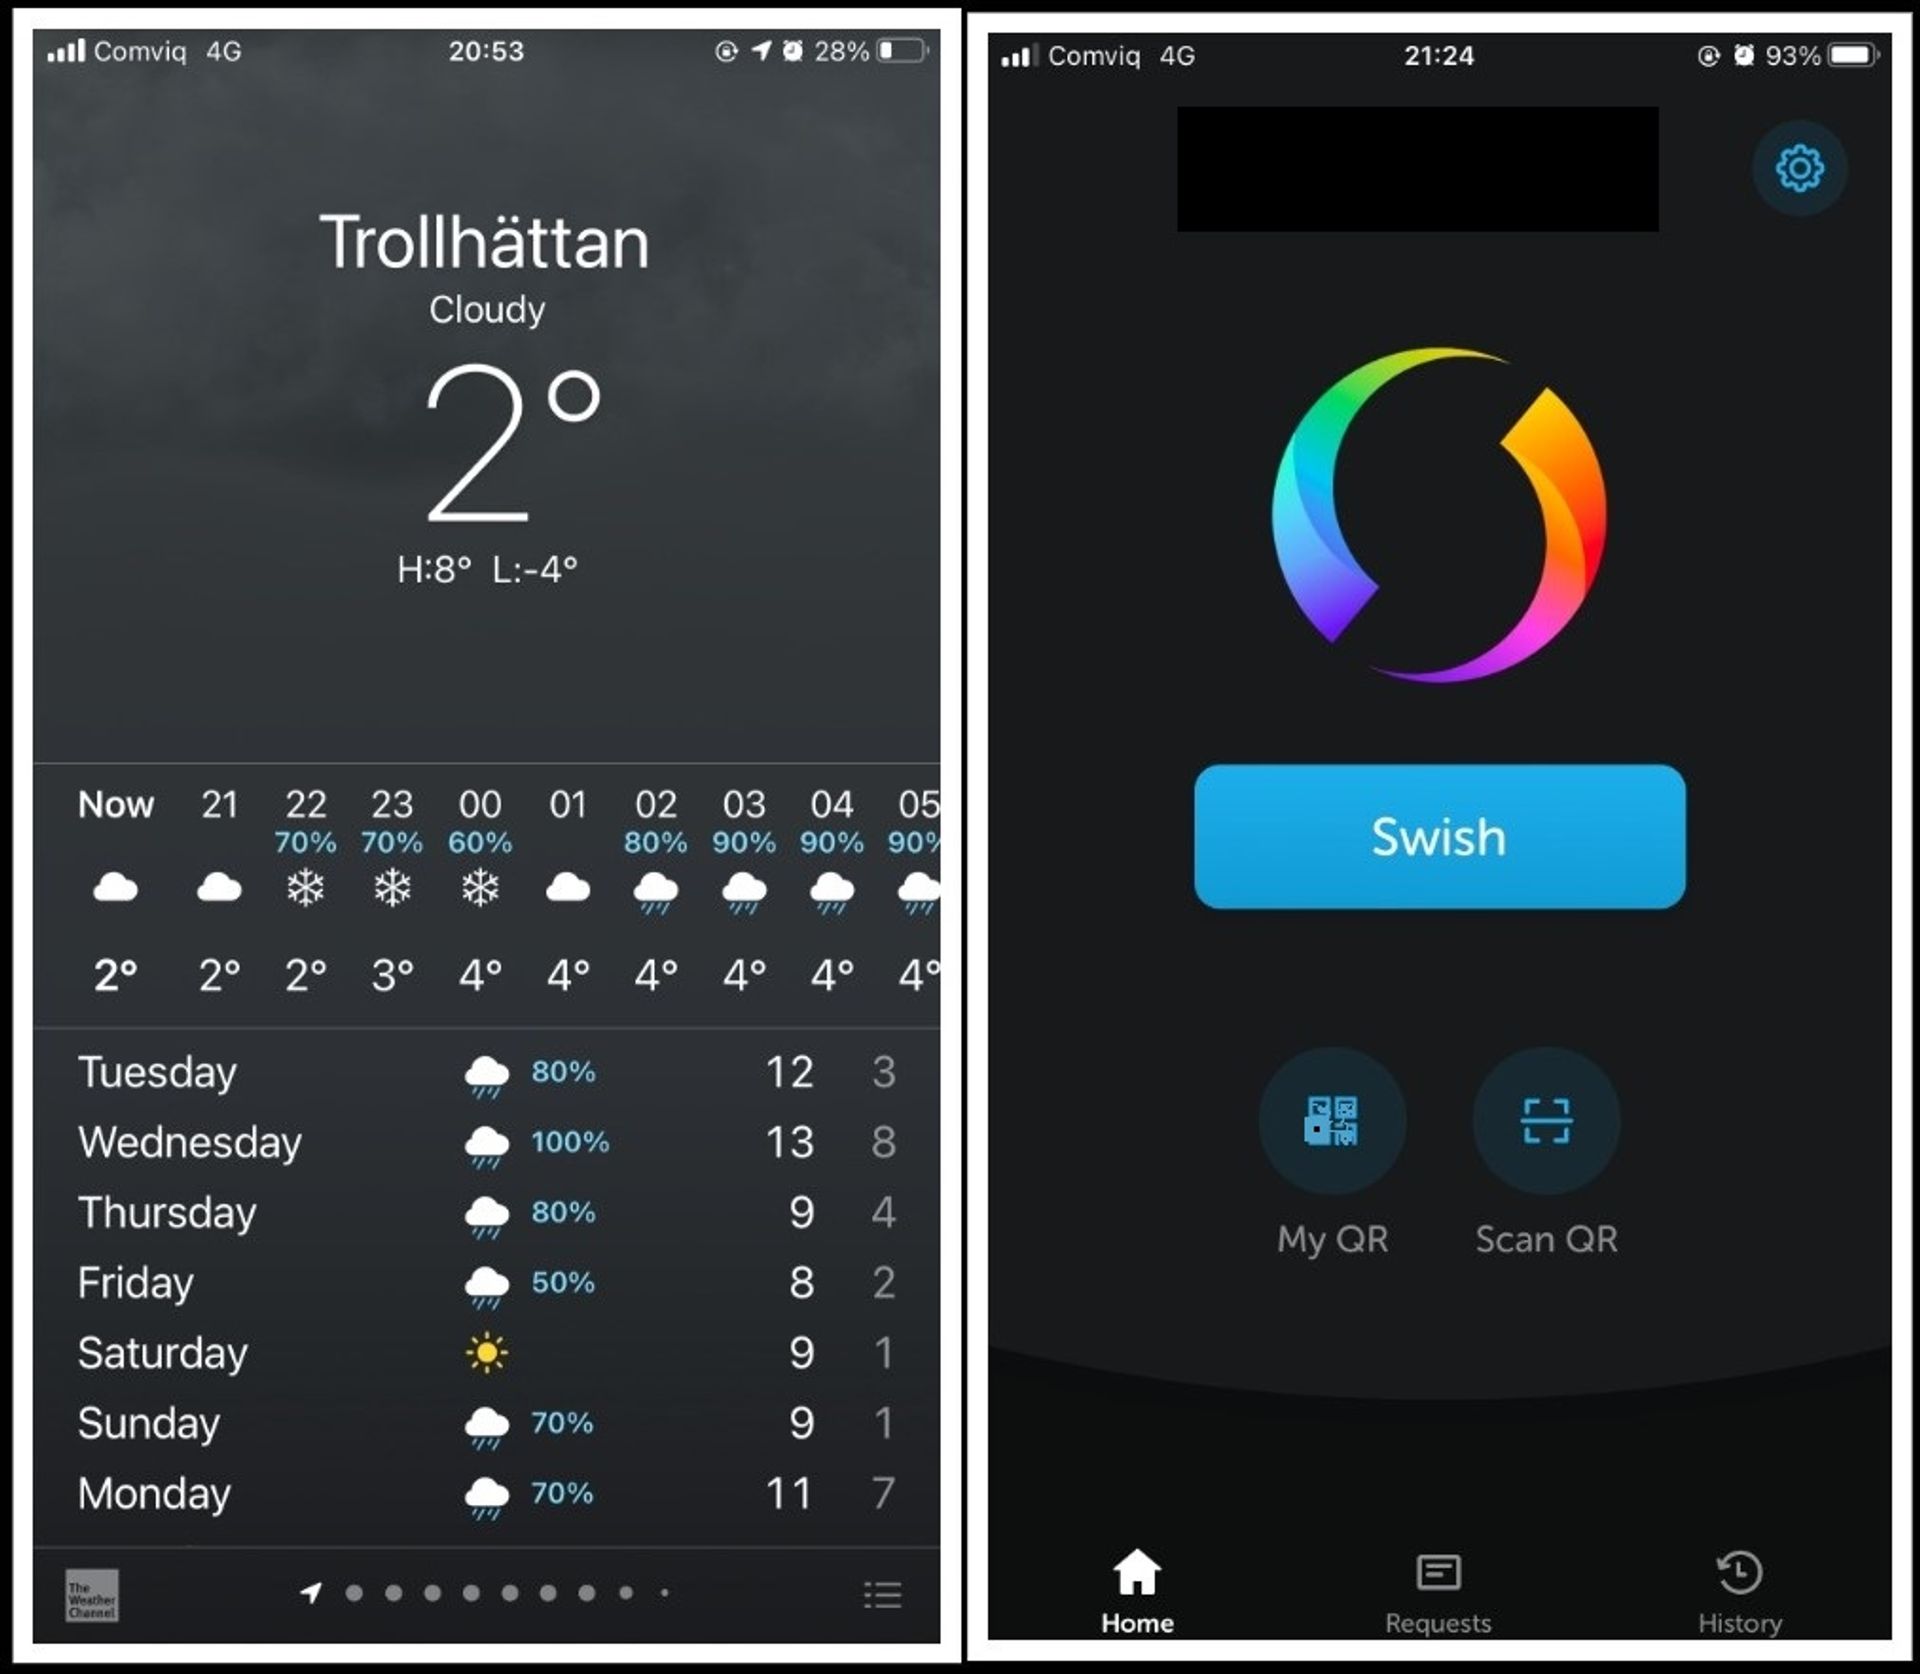 A collage of screenshots showing the weather app and swish mobile application